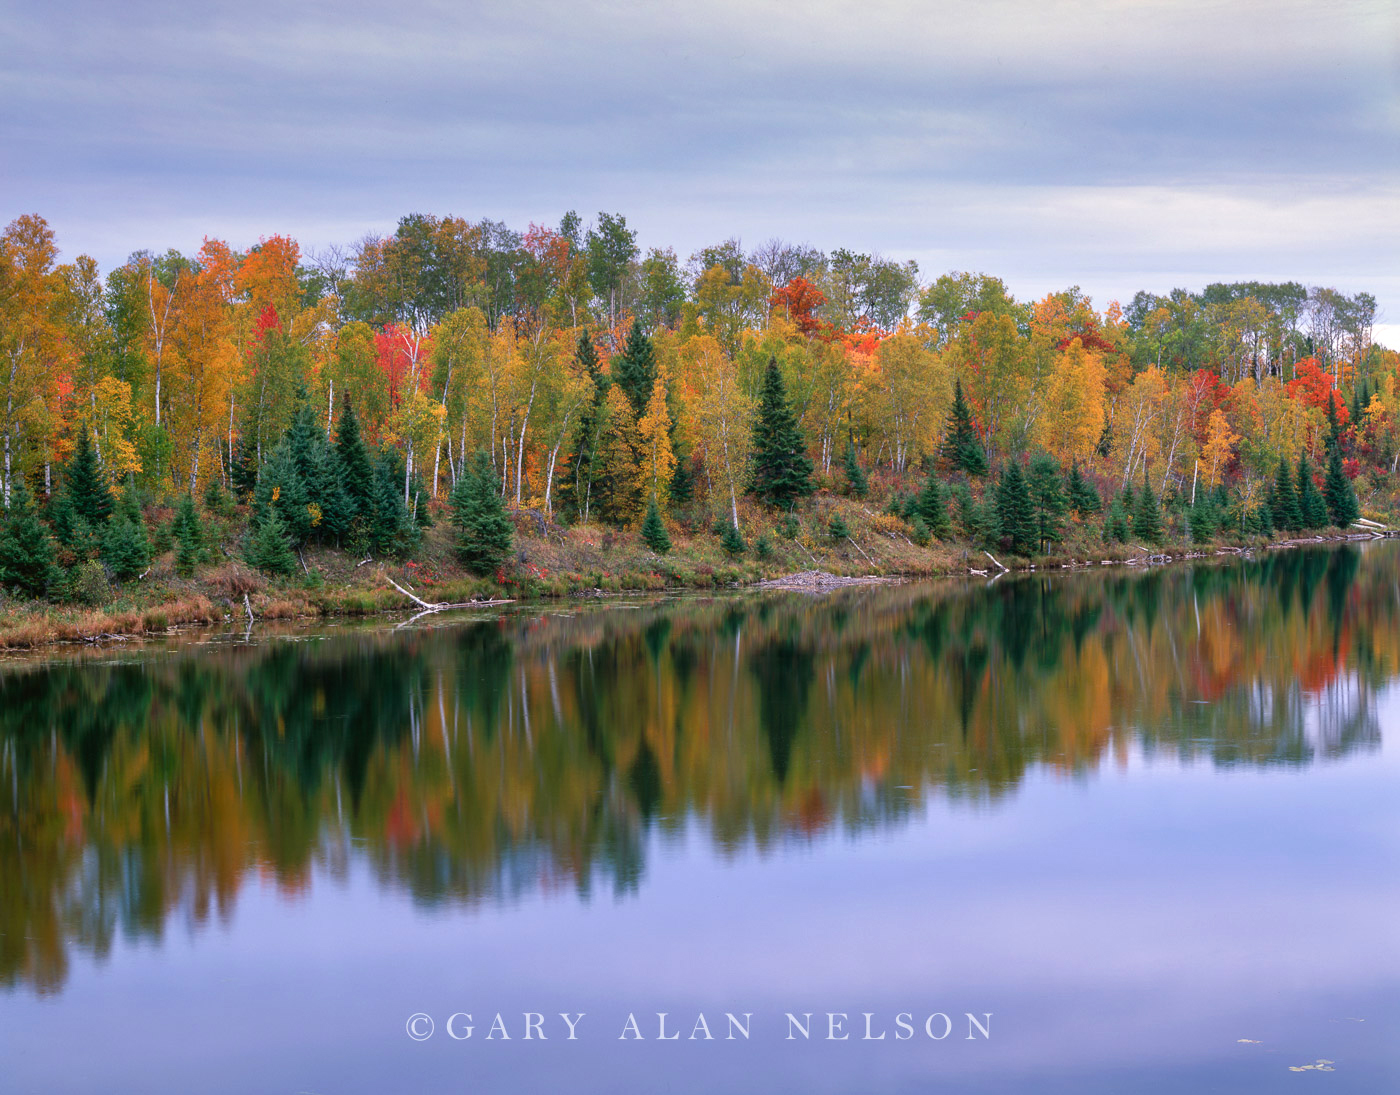 Autumn in the Chippewa National Forest, Minnesota